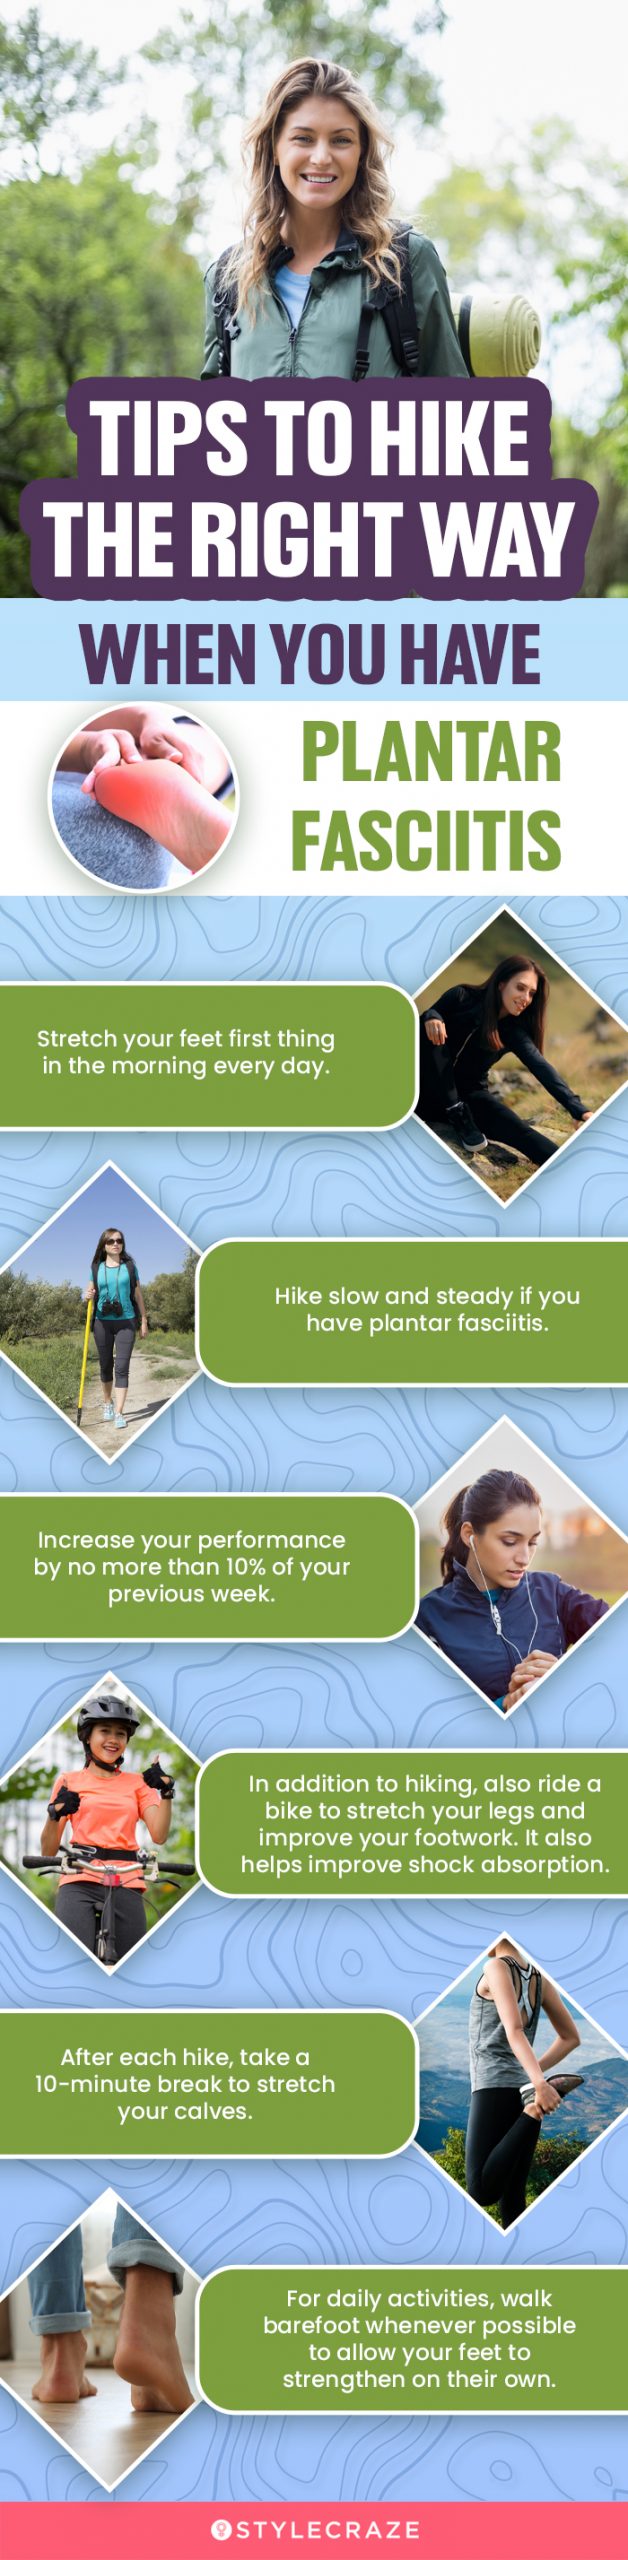 Tips To Hike The Right Way When You Have Plantar Fasciitis [infographic]